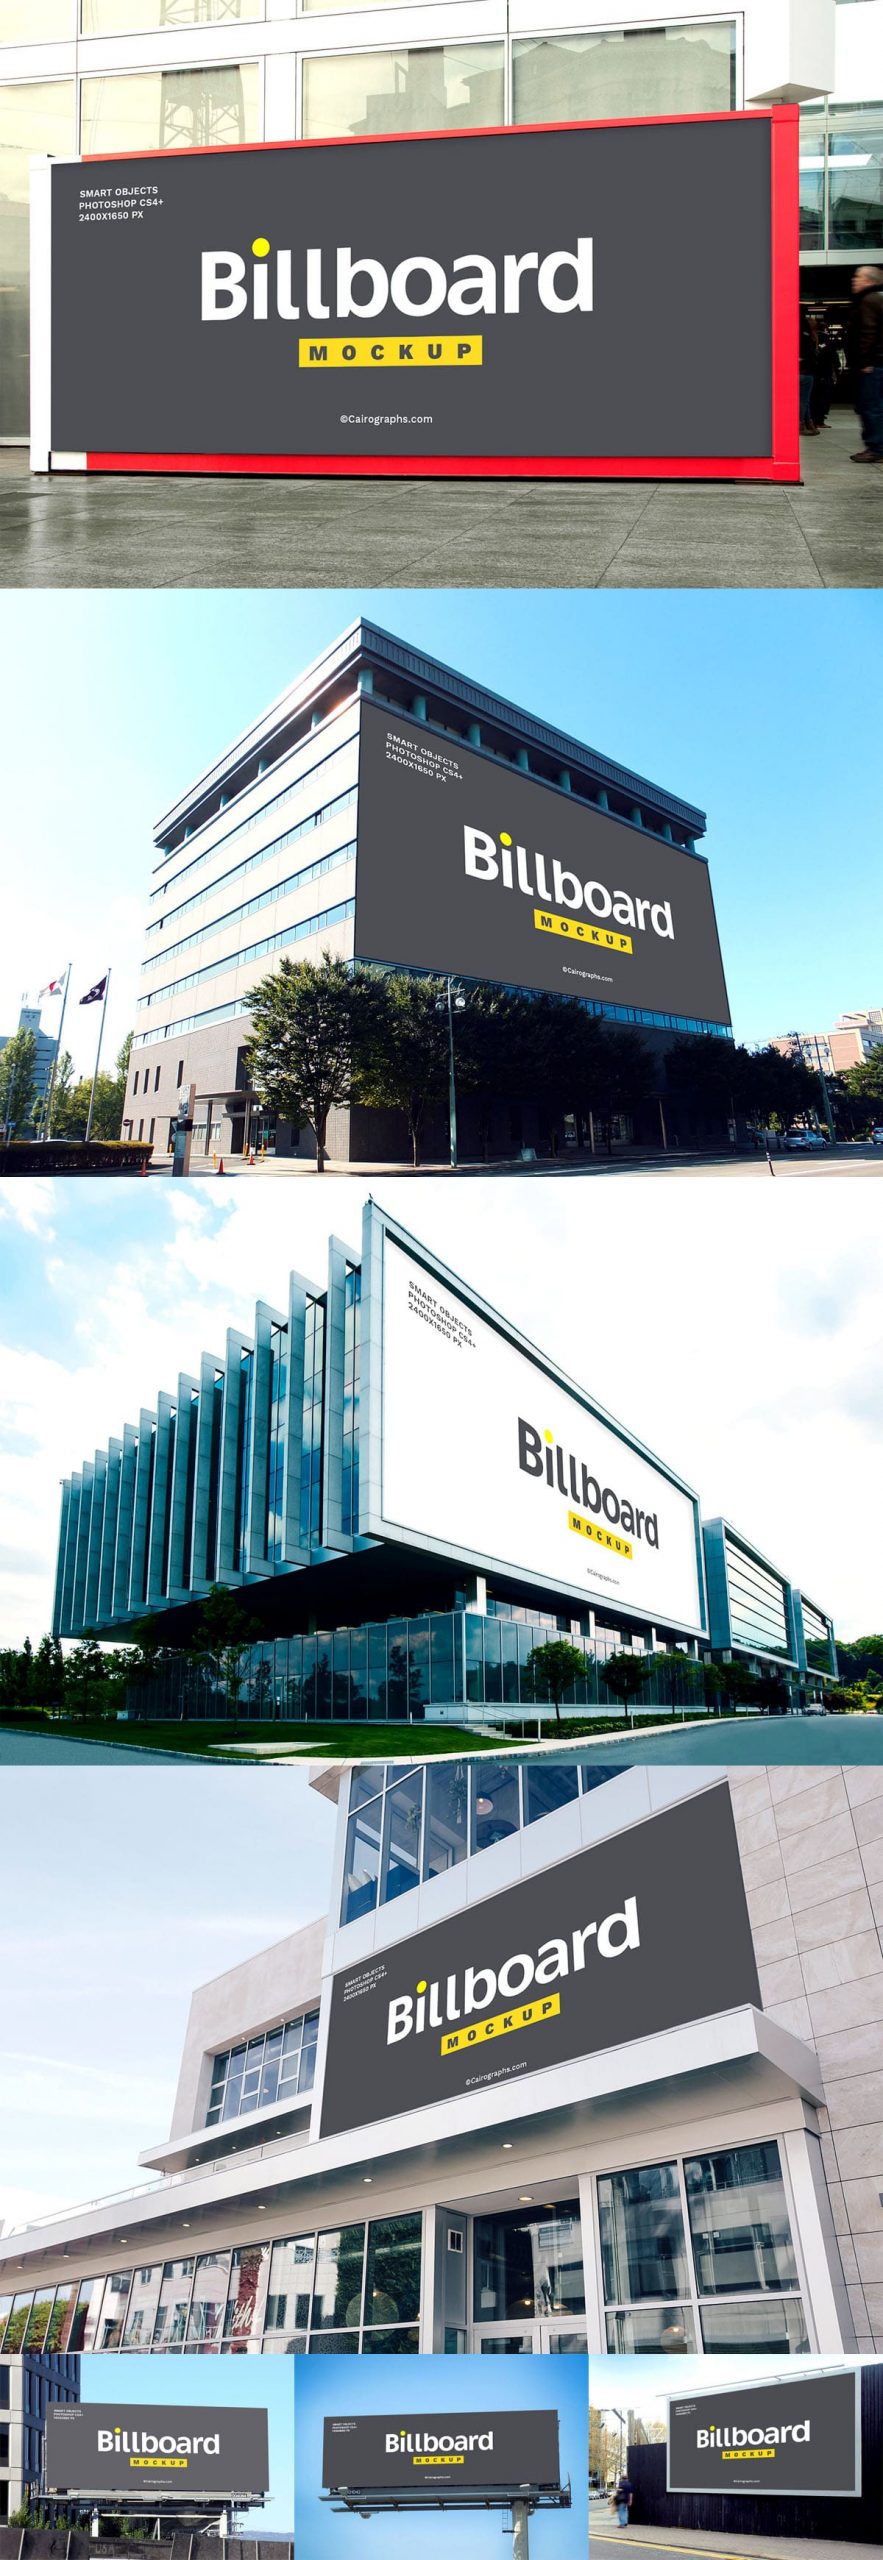 Download Free Billboards Mockups PSD - Find the Perfect Creative ...